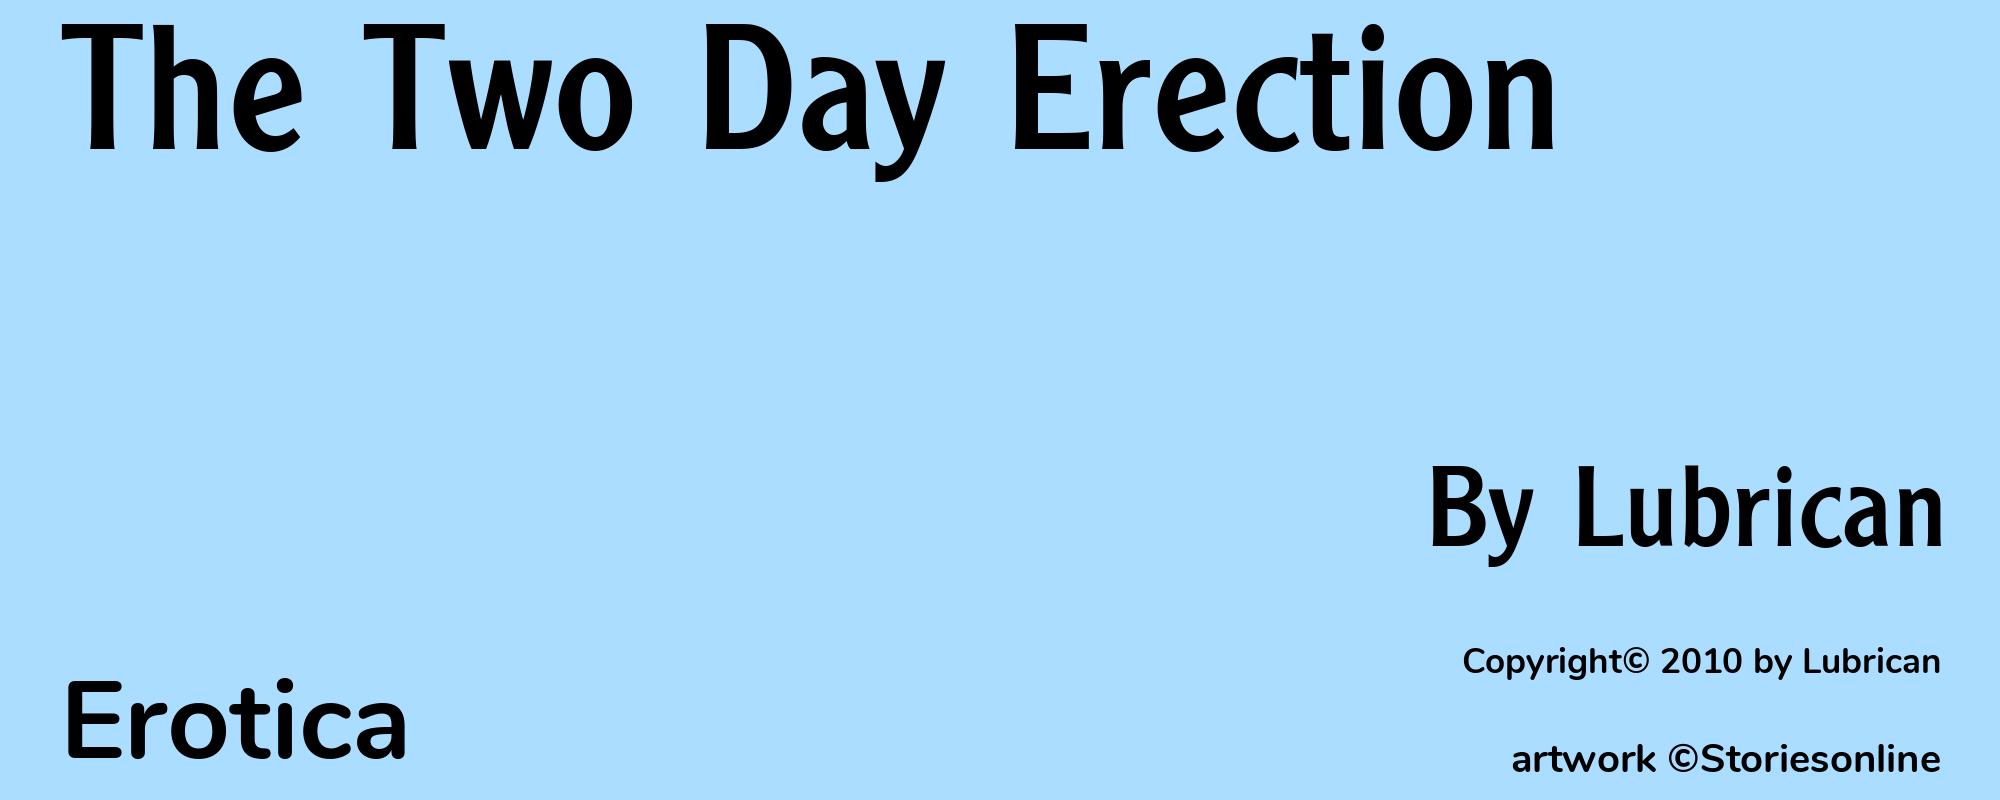 The Two Day Erection - Cover